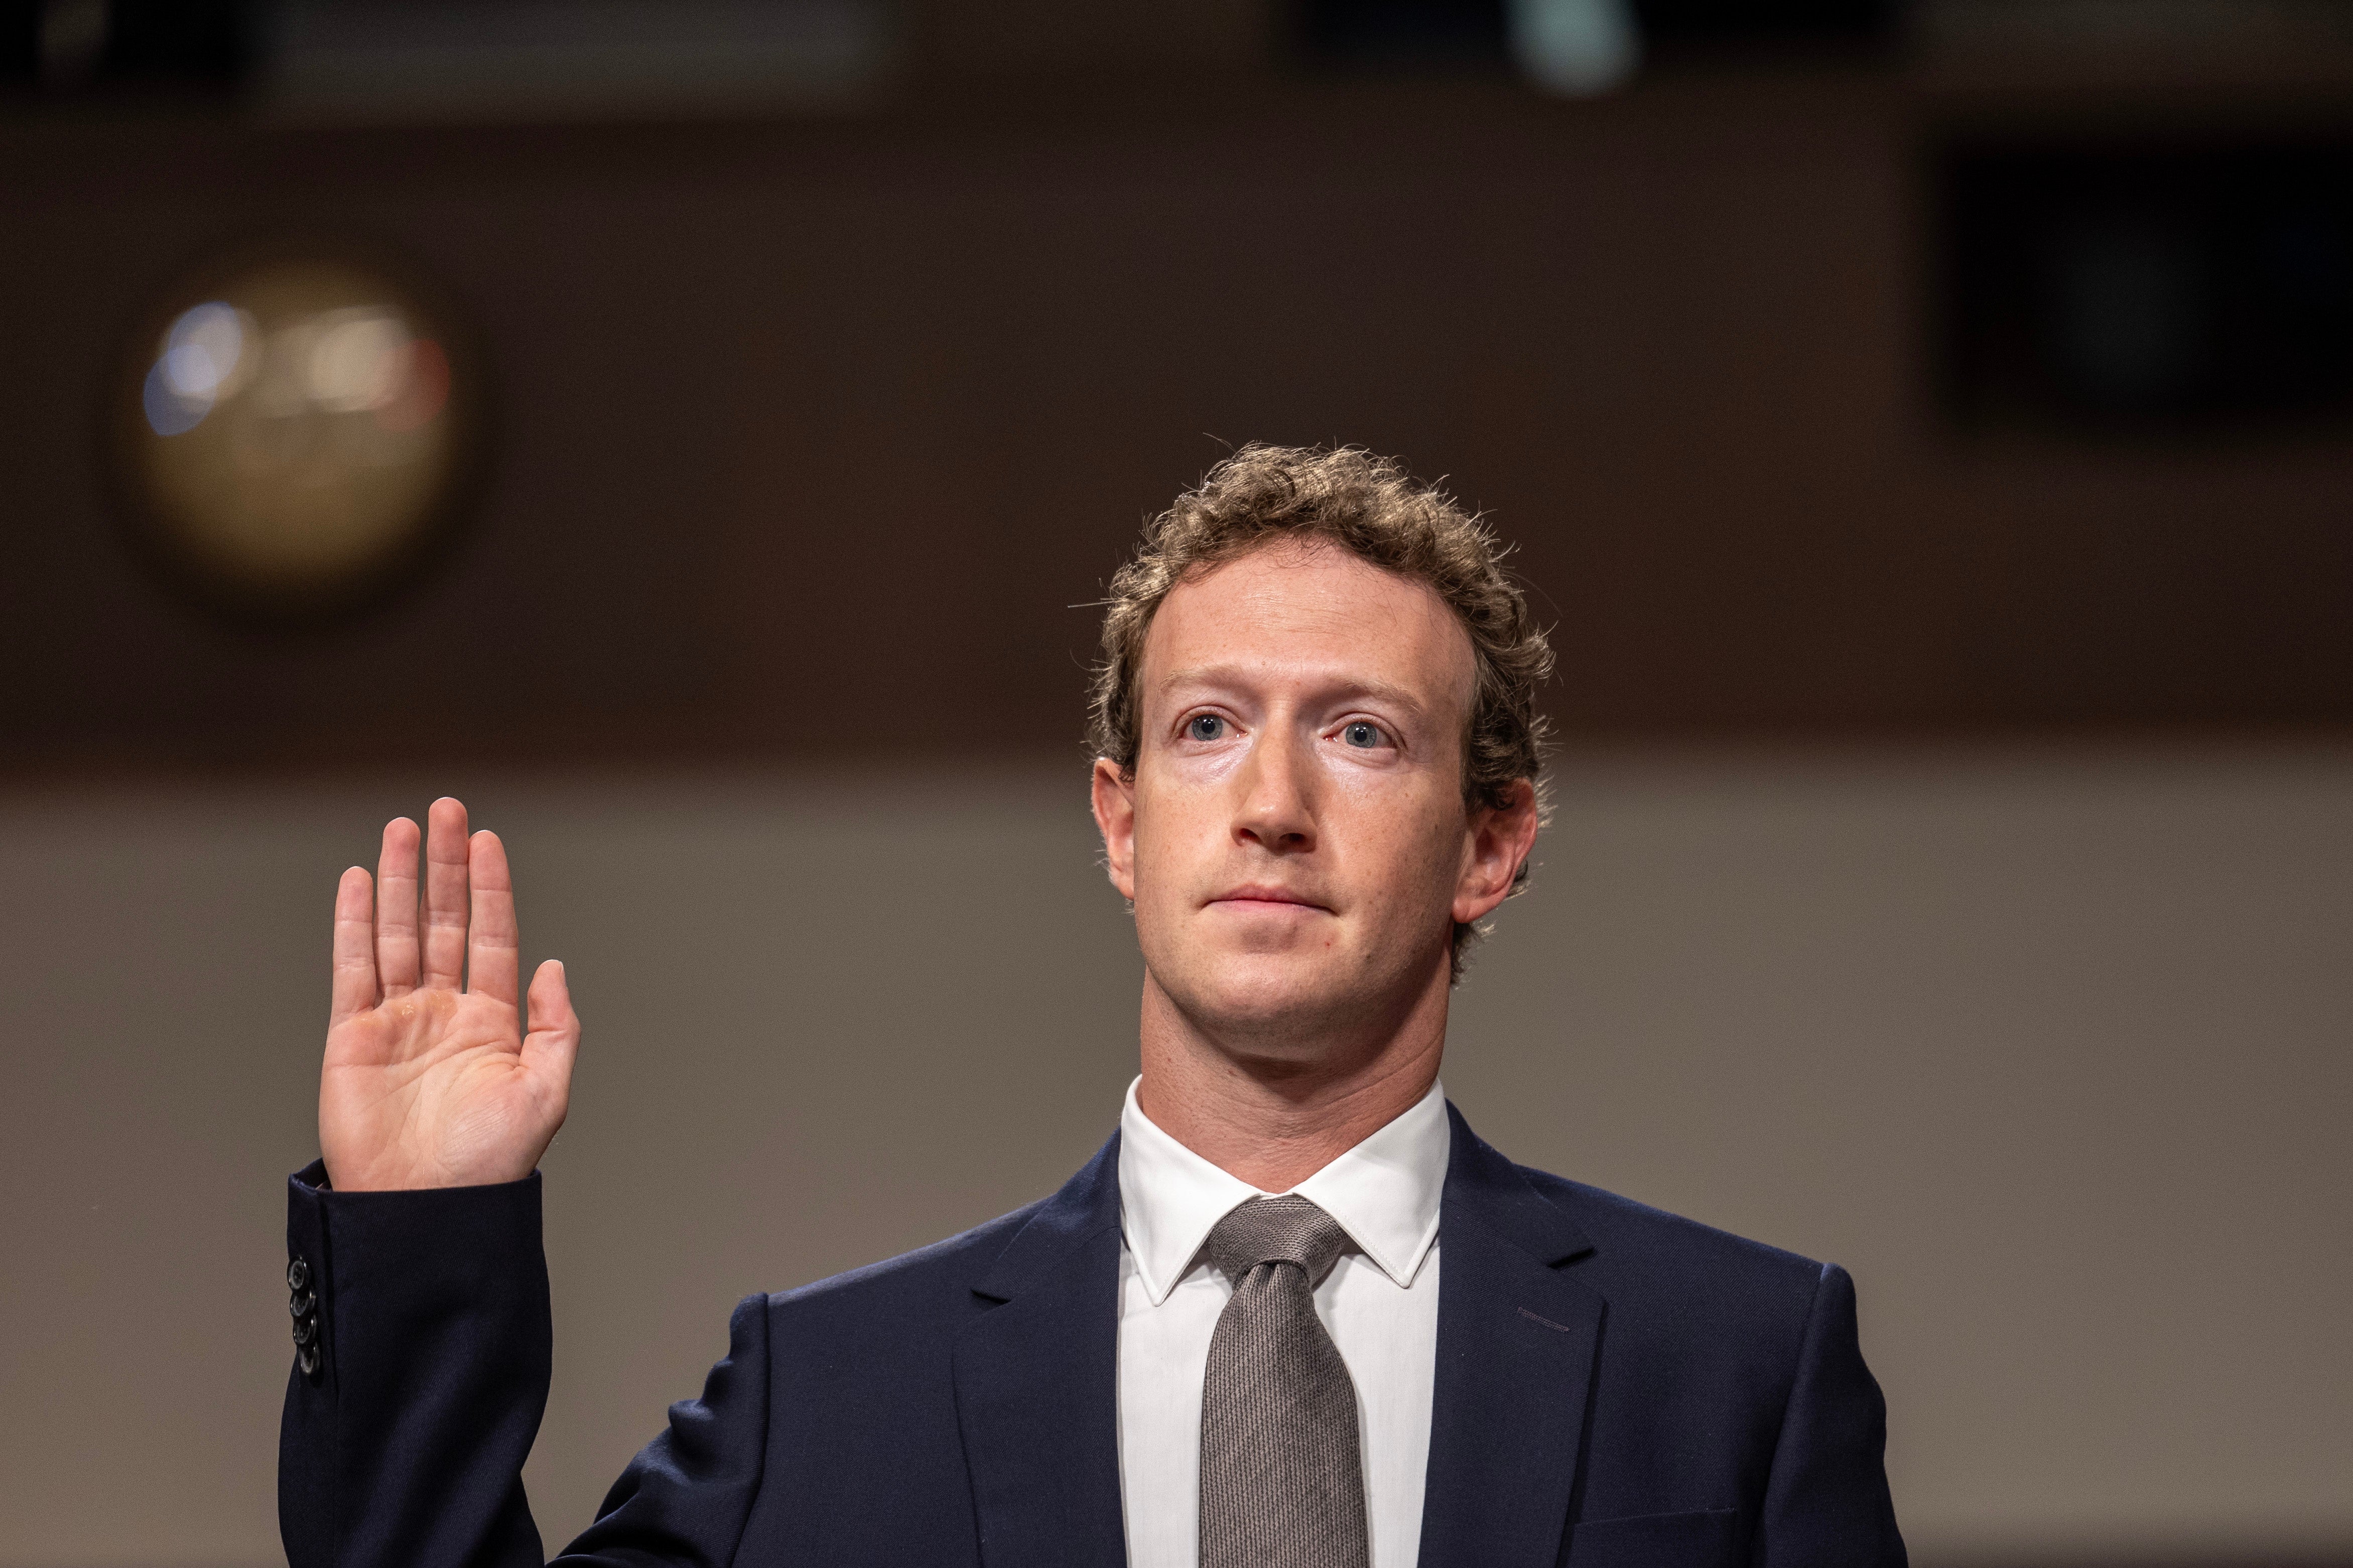 Meta CEO Mark Zuckerberg prepares to testify before a Senate judiciary committee hearing on protecting children online, in Washington on Wednesday